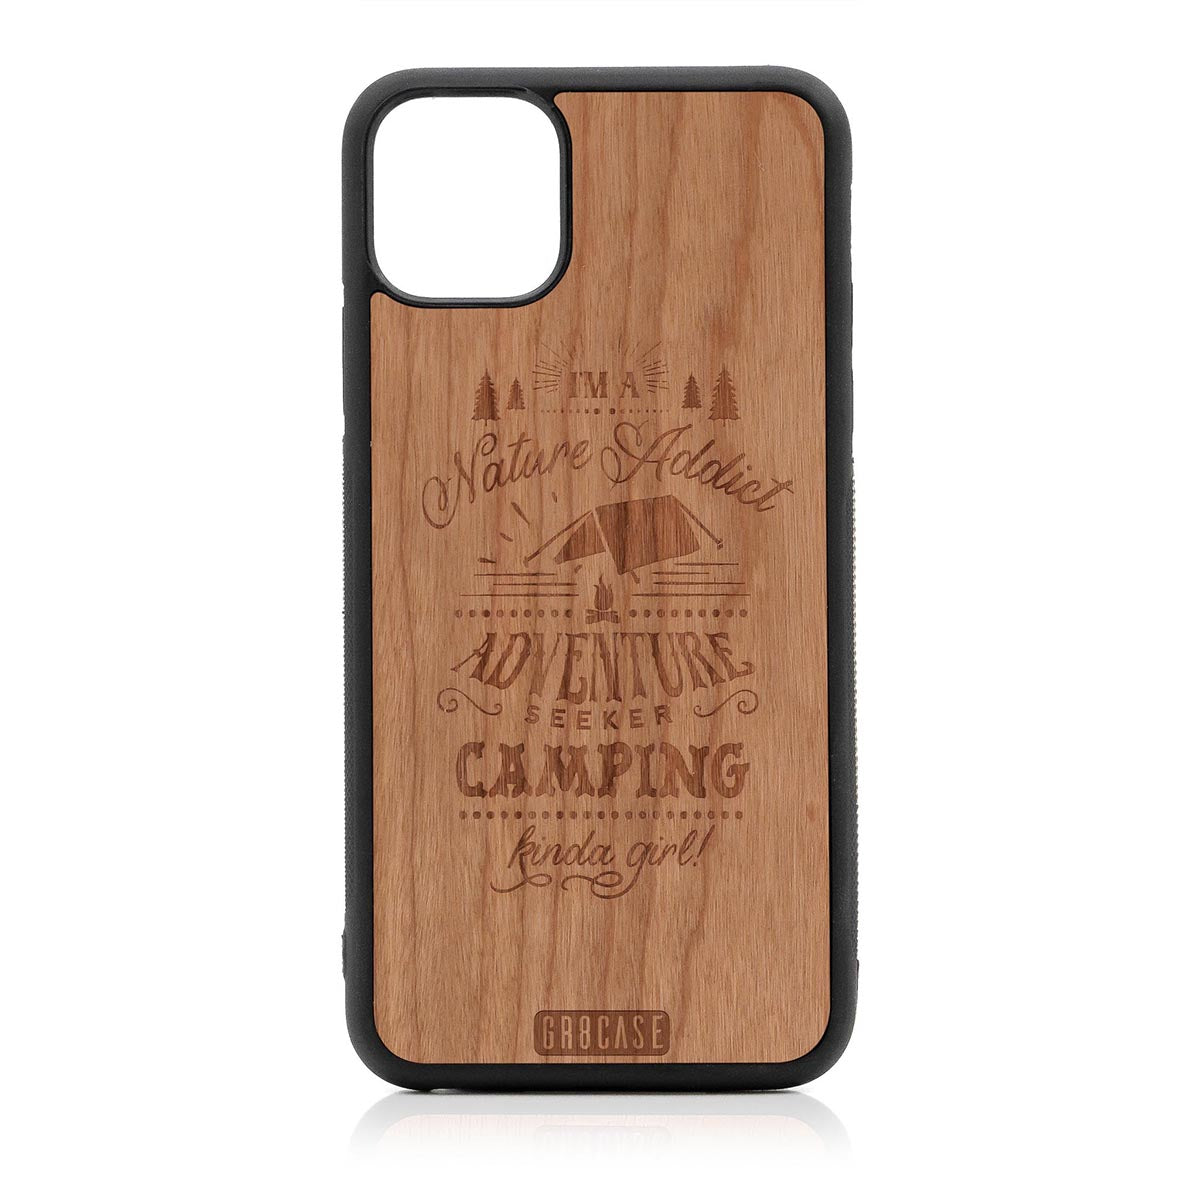 I'm A Nature Addict Adventure Seeker Camping Kinda Girl Design Wood Case For iPhone 11 Pro Max by GR8CASE